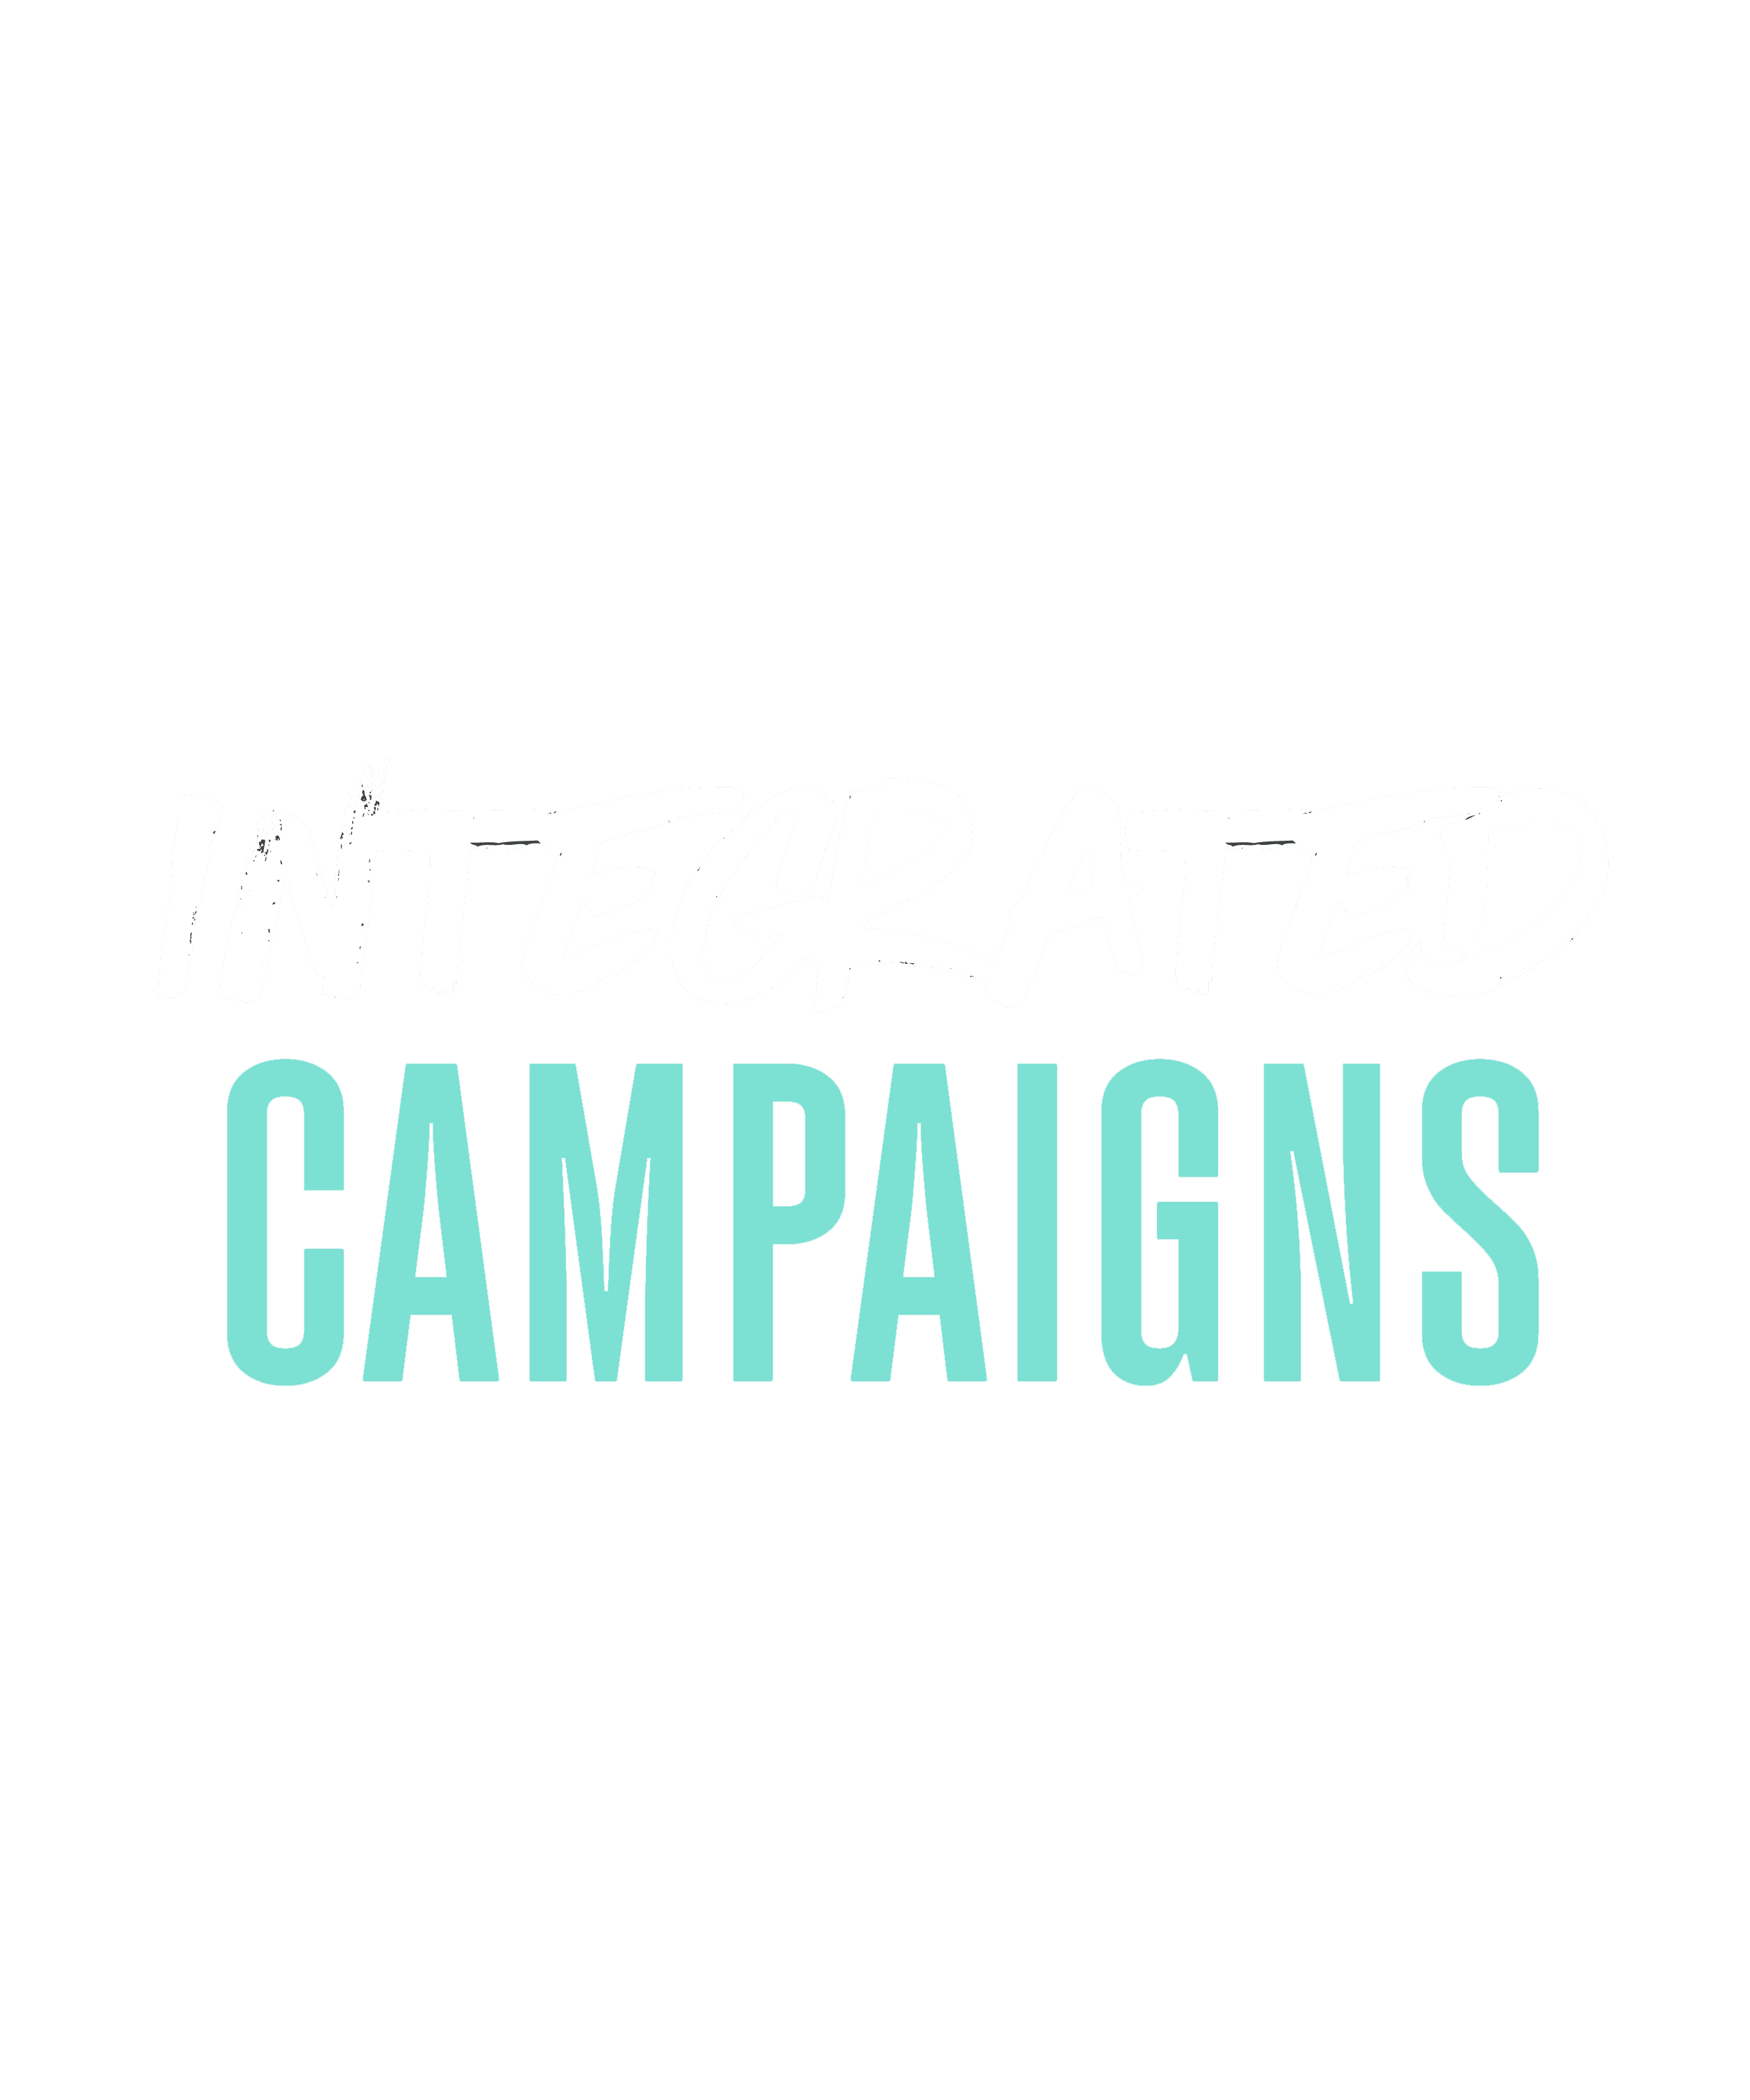 Integrated campaigns Tile